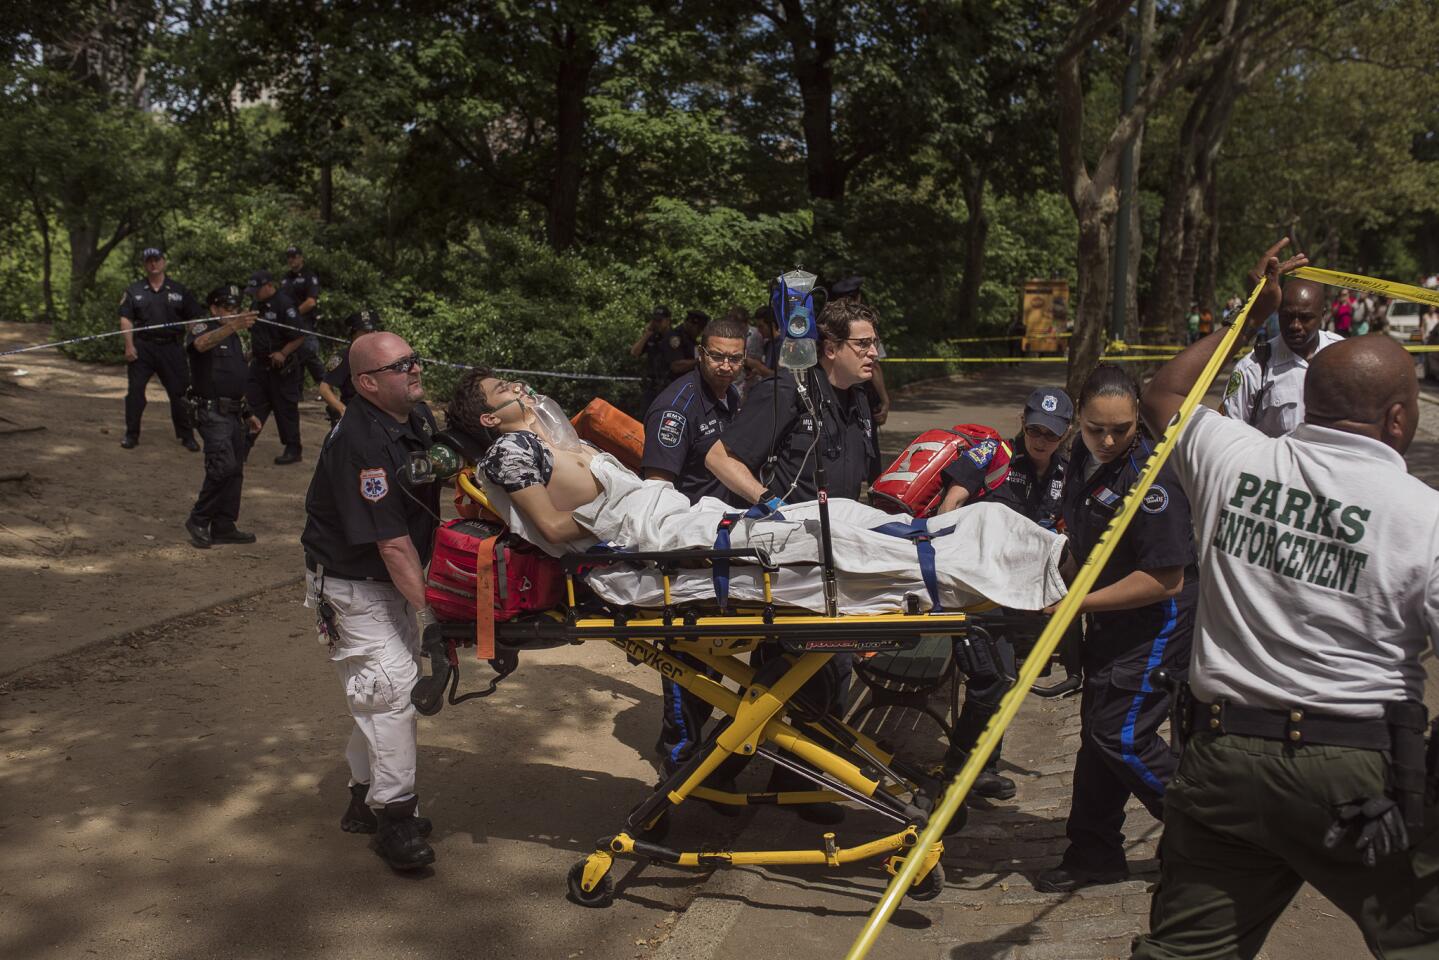 A injured man is carried to an ambulance in Central Park in New York, Sunday, July 3, 2016. Authorities say a man was seriously hurt in Central Park and people near the area reported hearing some kind of explosion.